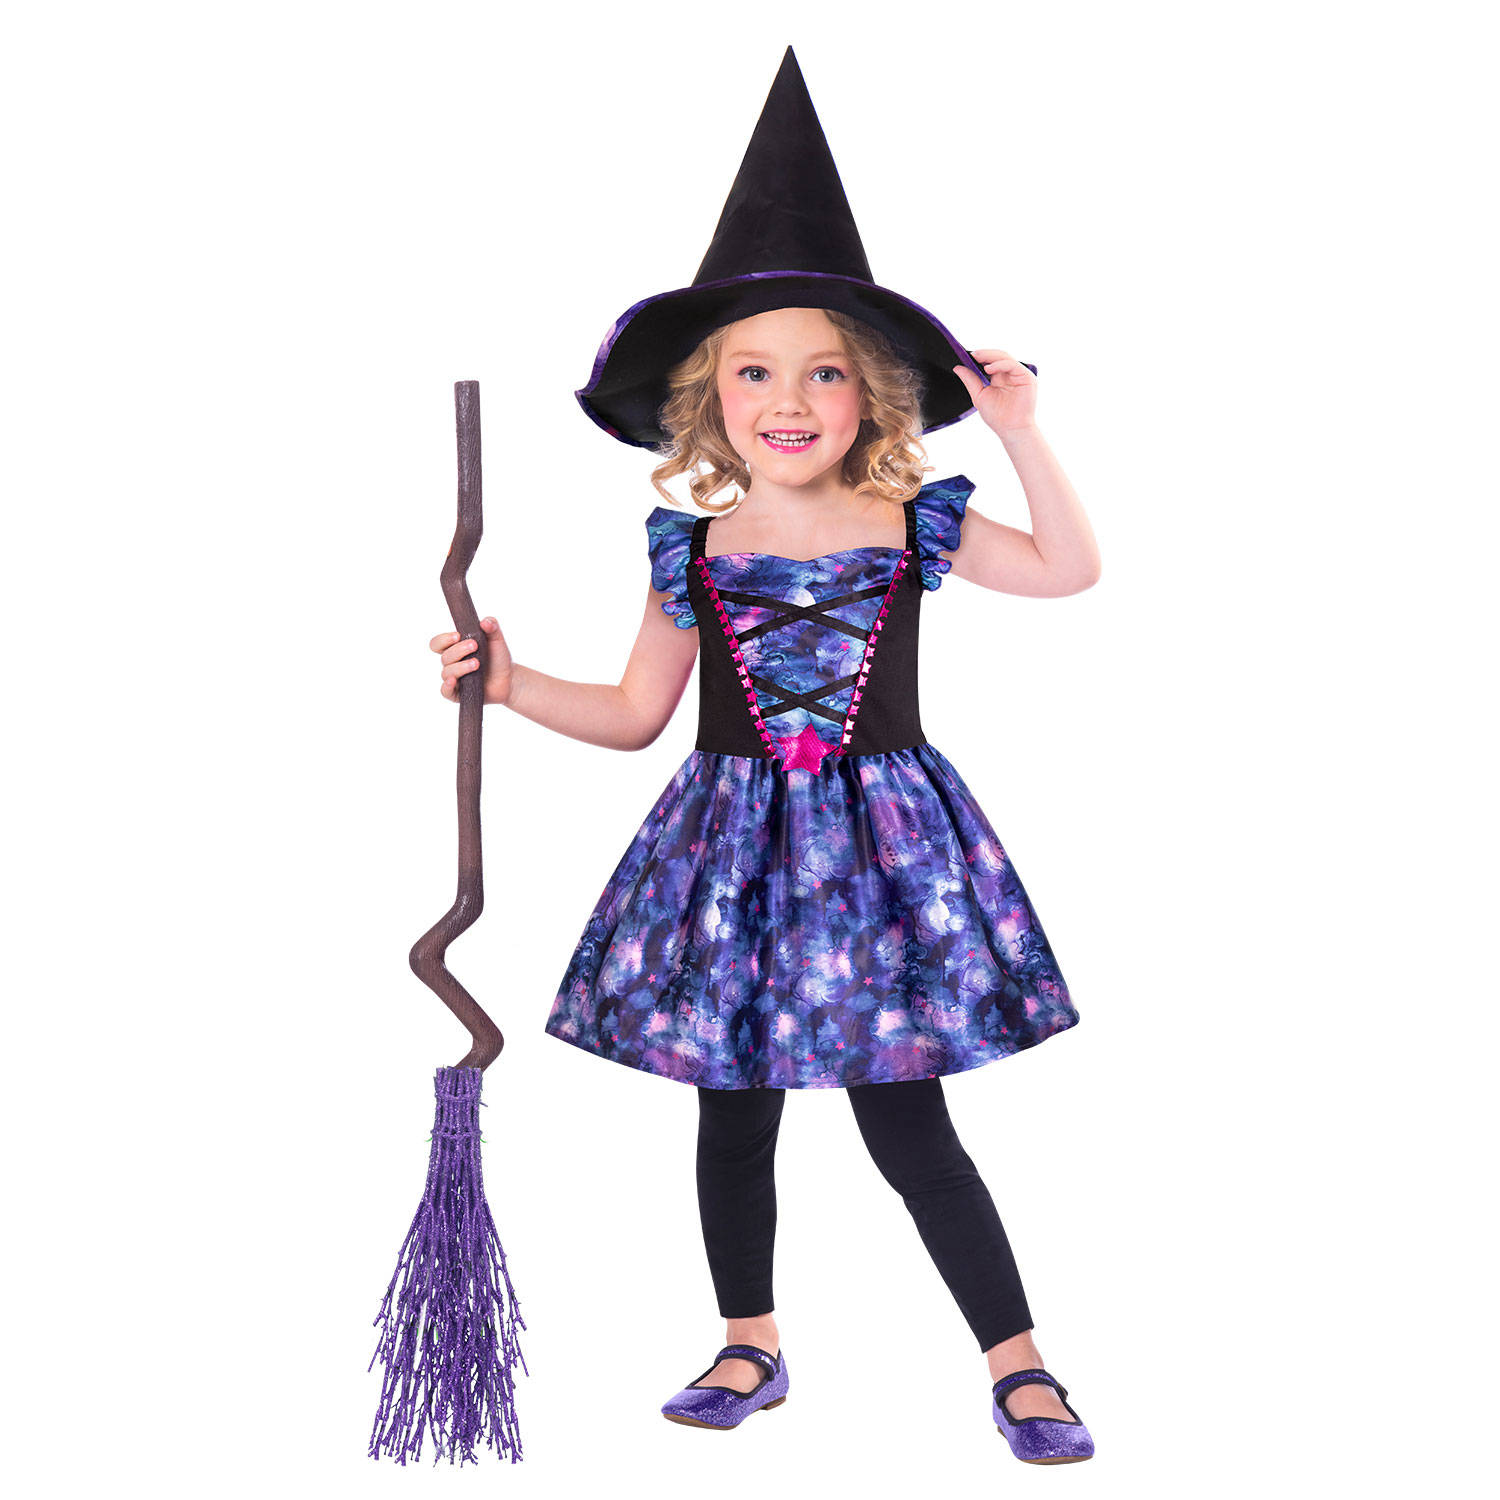 Outfit, costume disguise witch witches 6-8 years old | Costiumes ...